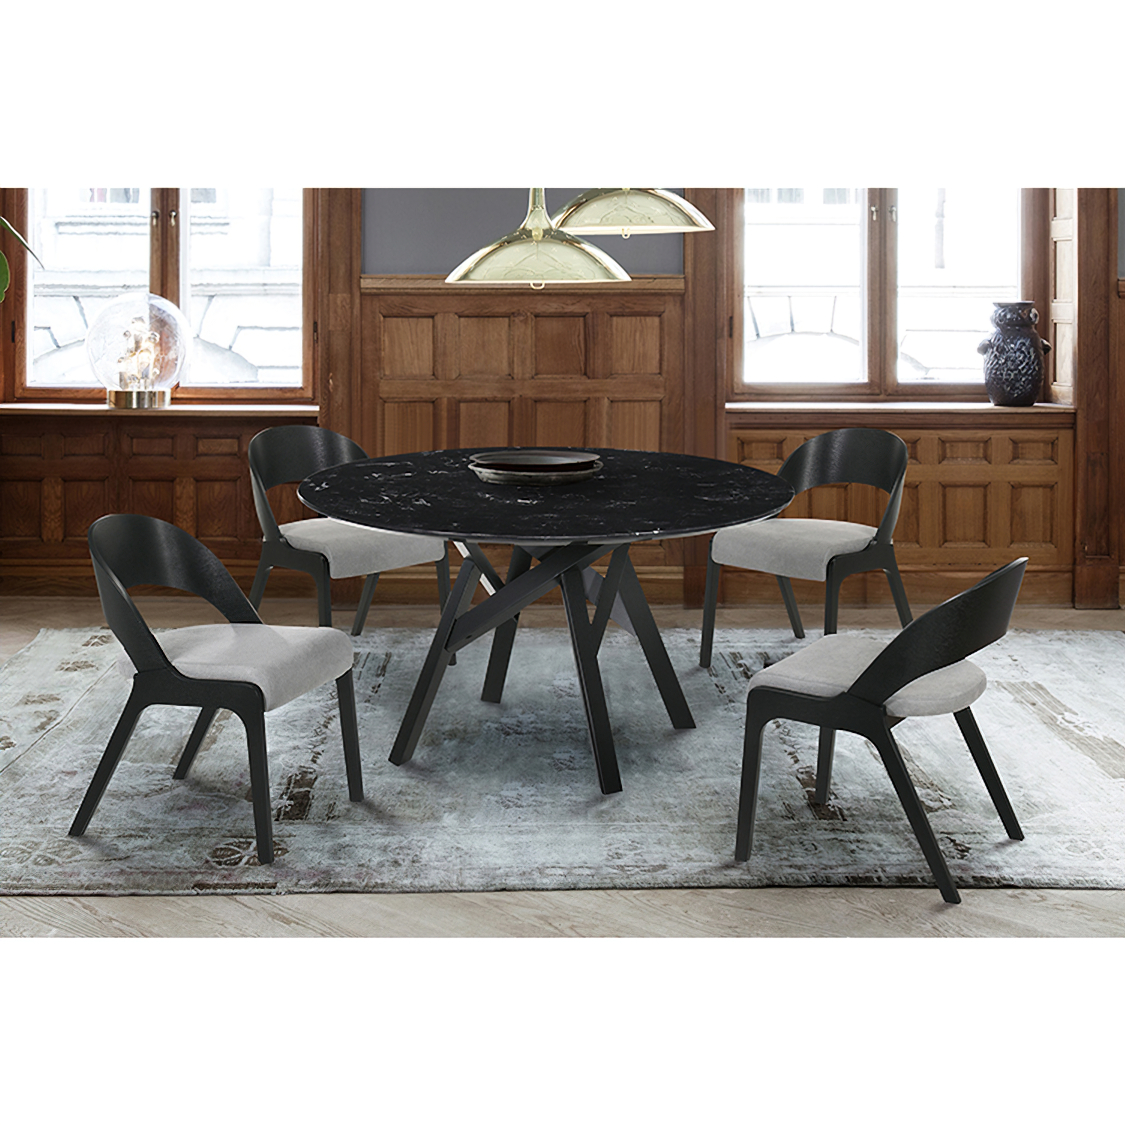 Venus and Polly 5 Piece Black Marble Round Dining Set by Armen Living